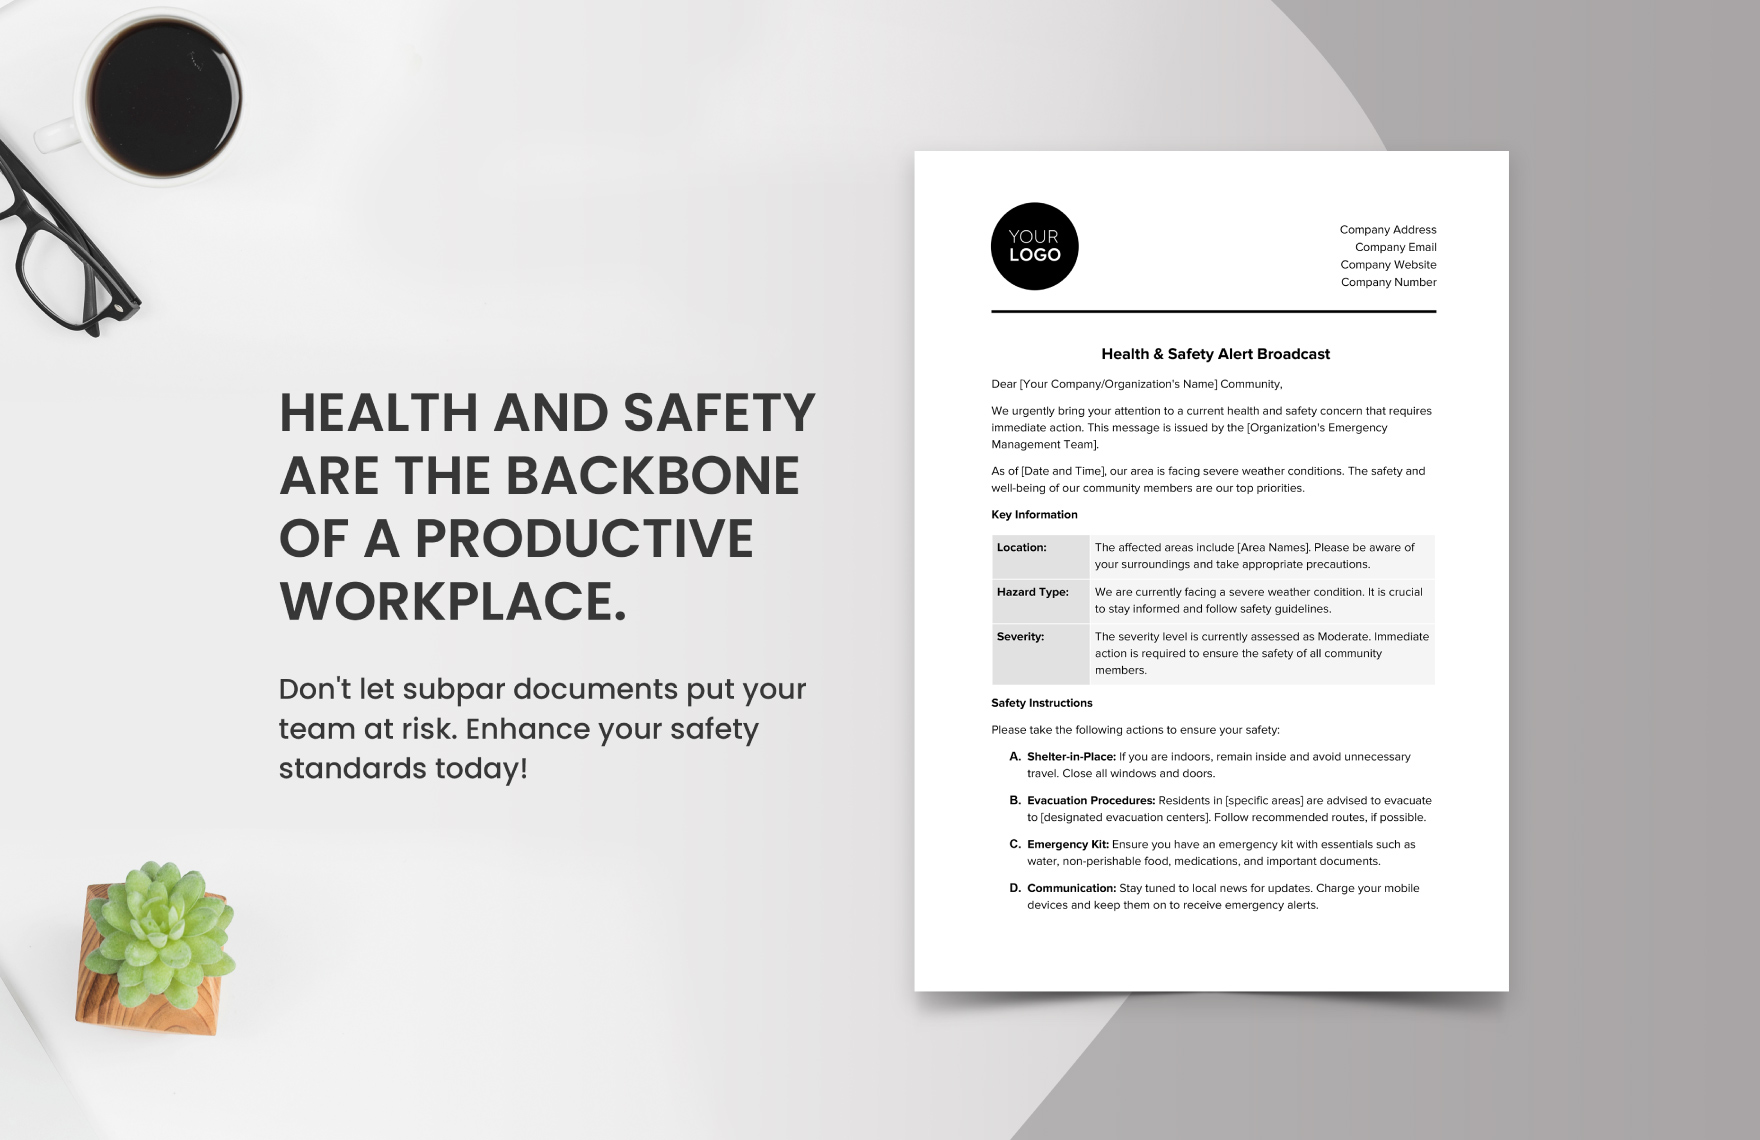 Health & Safety Alert Broadcast Template